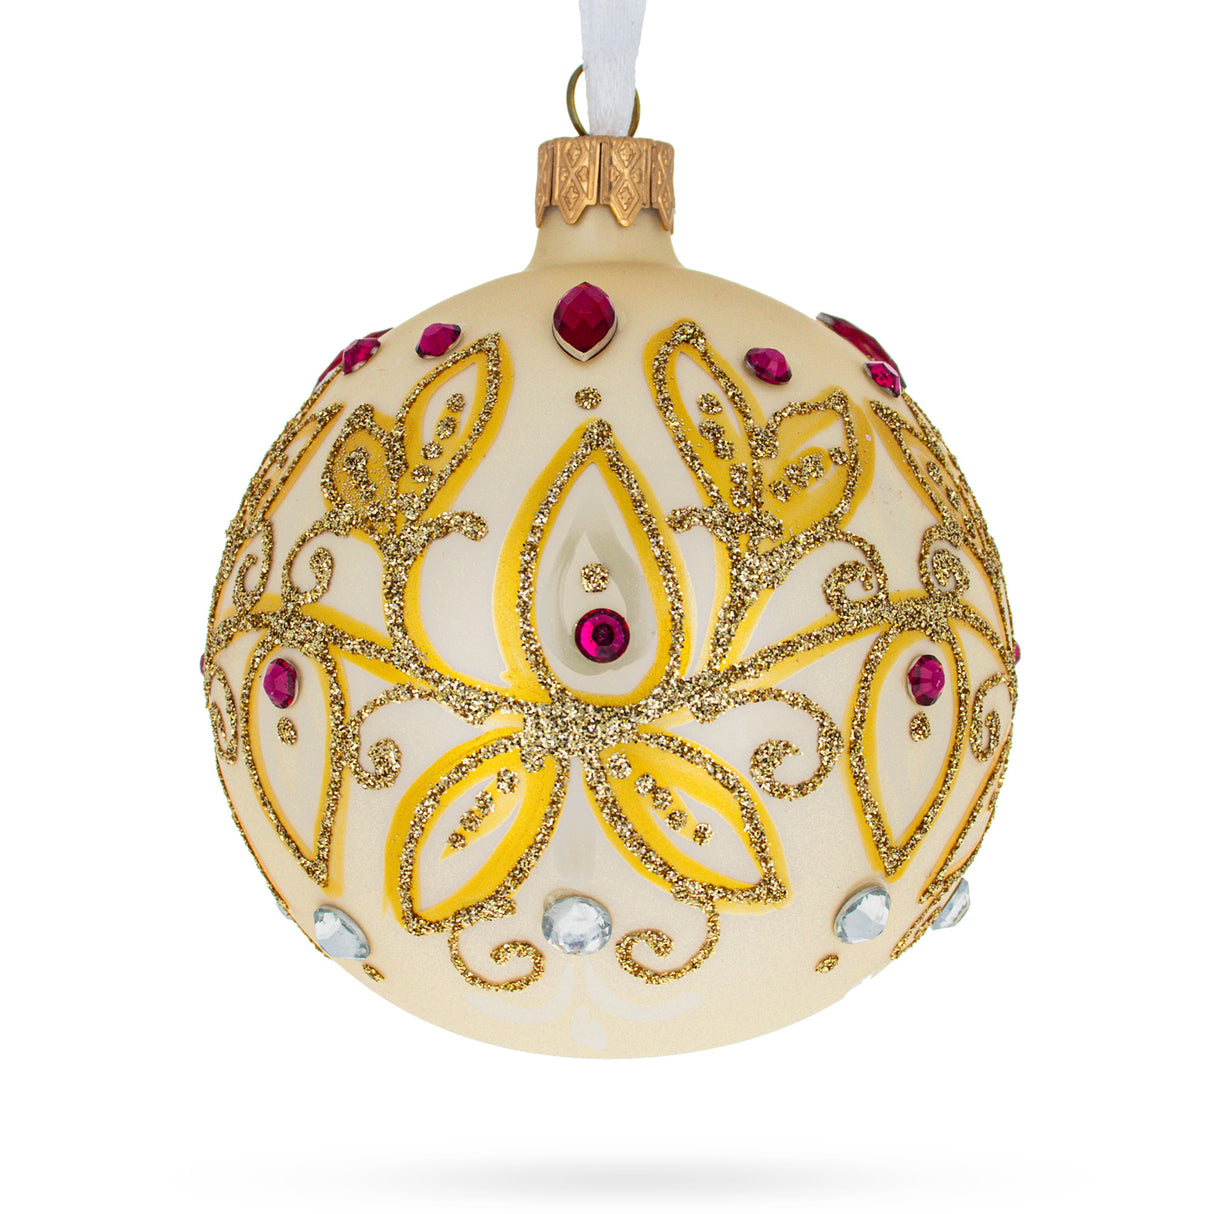 Autumn Radiance: Gilded Golden Leaves Blown Glass Ball Christmas Ornament 3.25 Inches in Gold color, Round shape